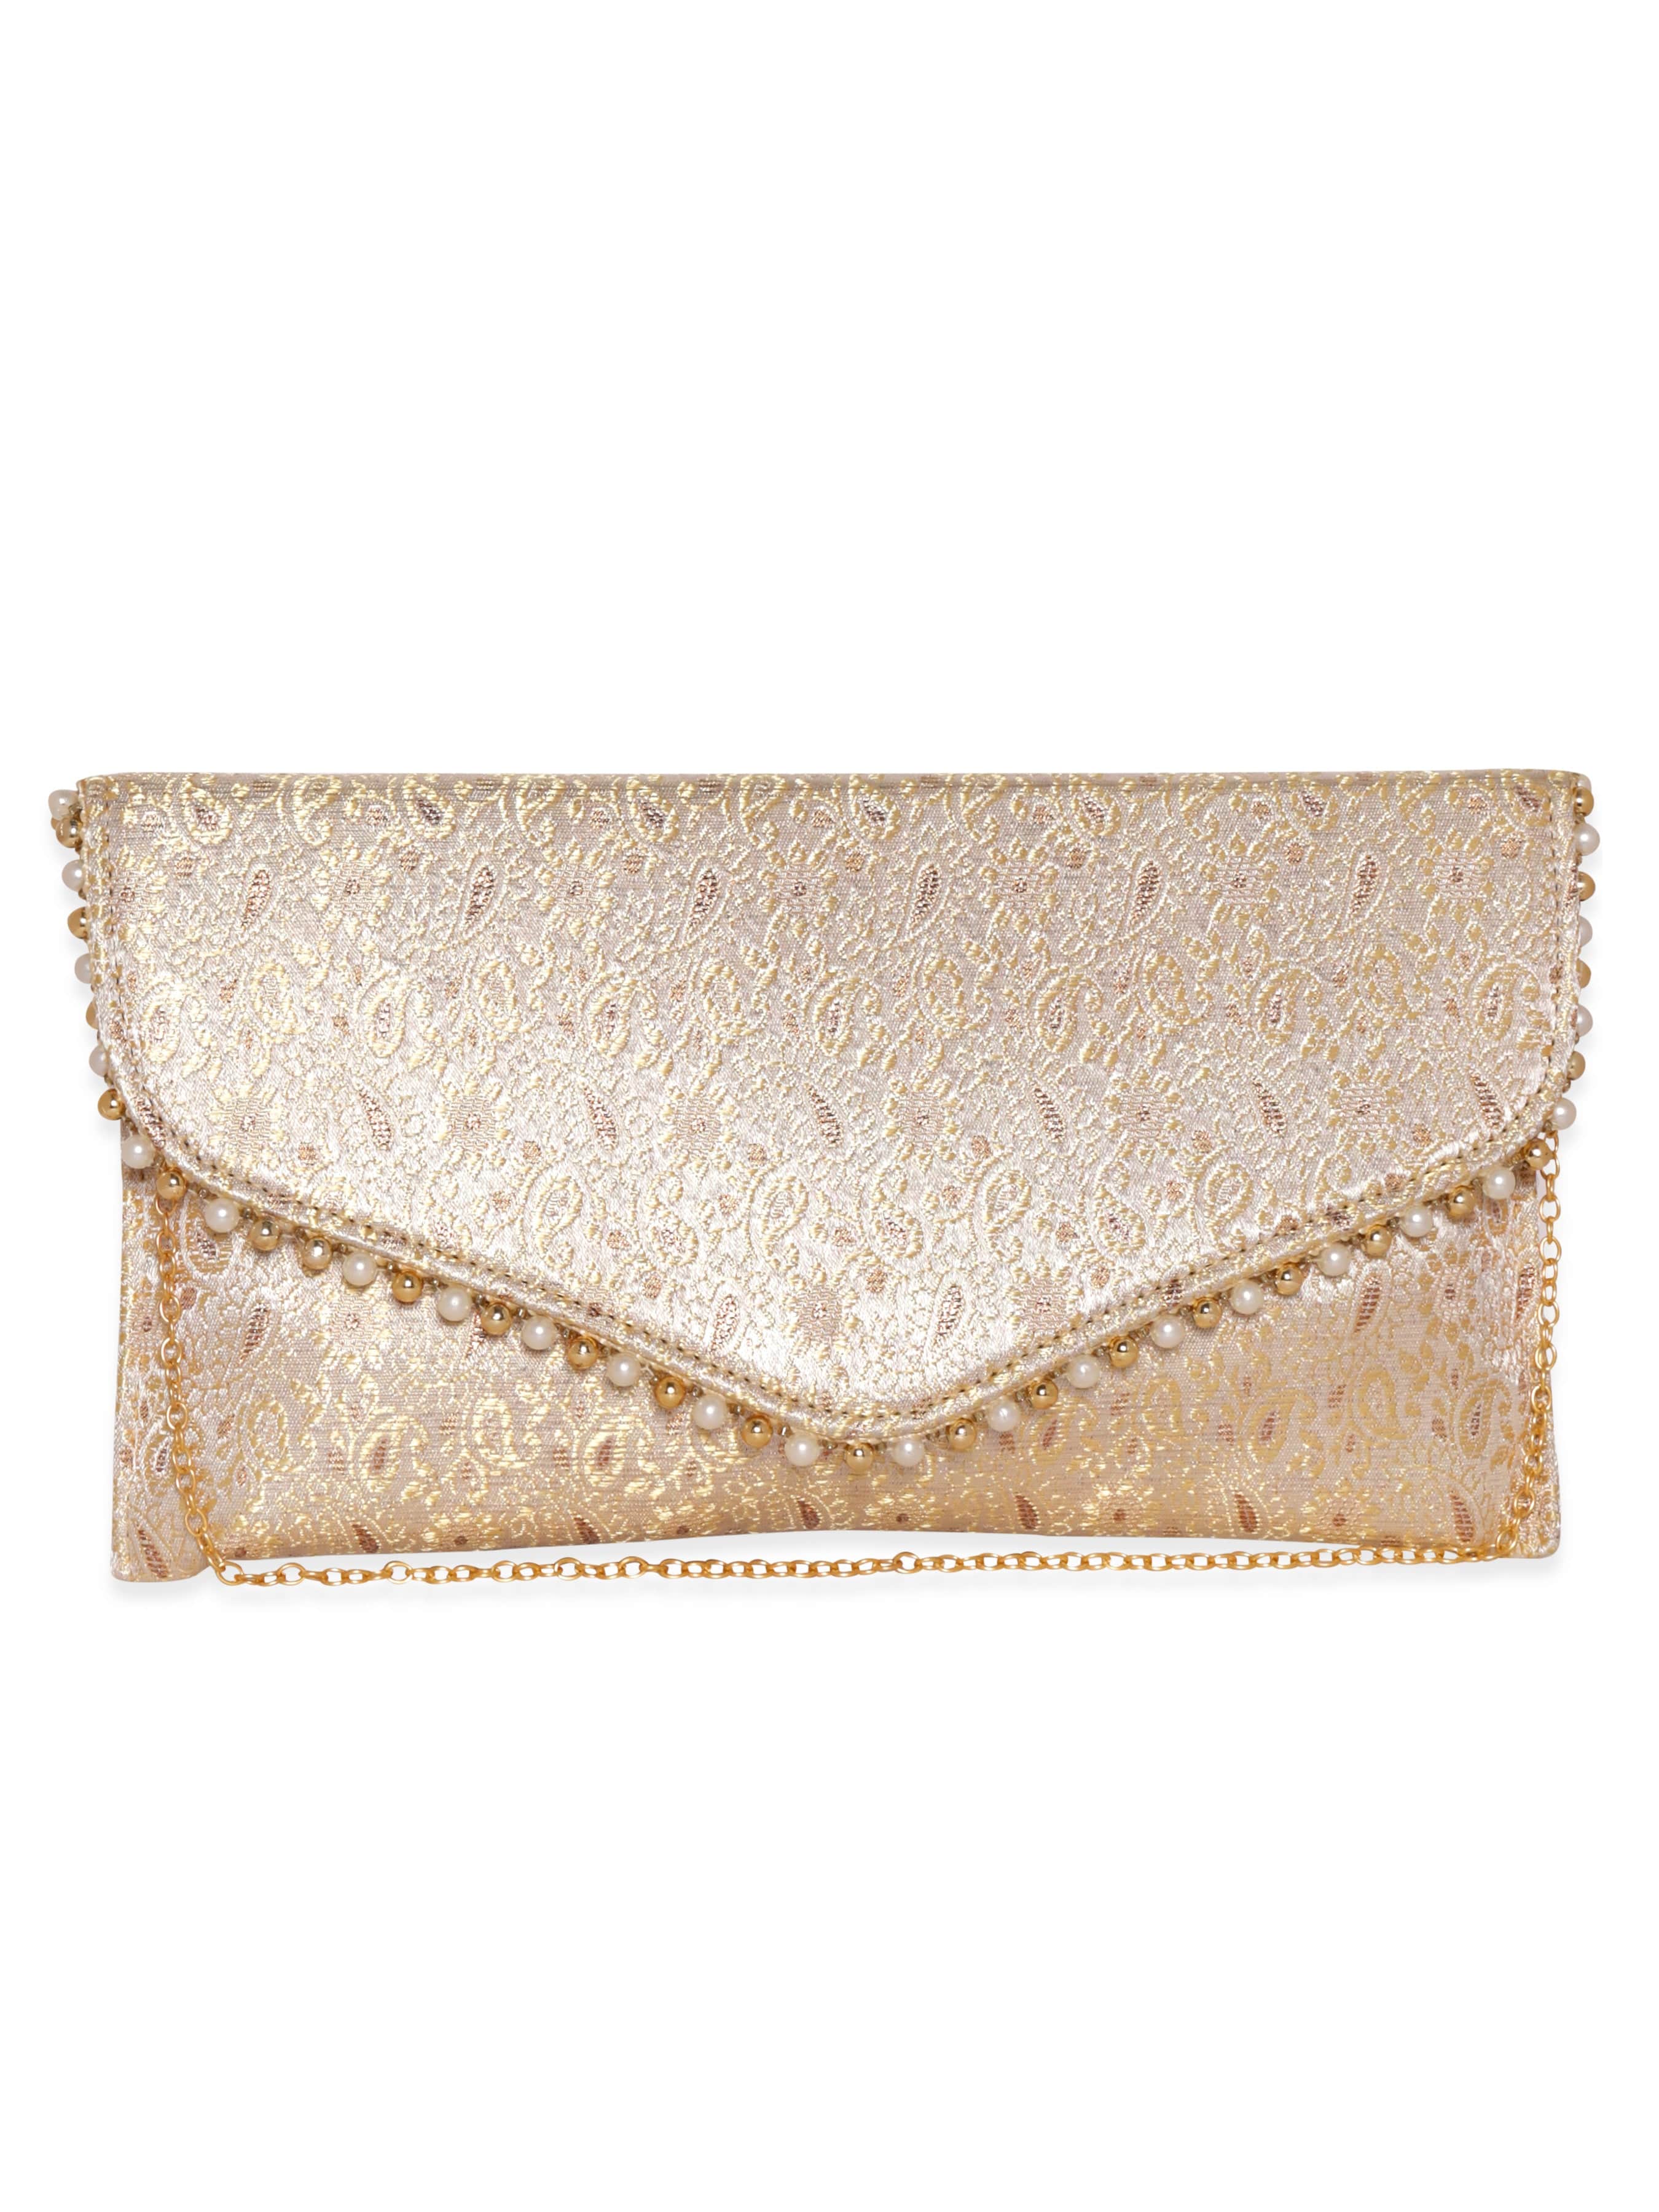 Rubans Golden Embroidery Clutch with Beads Handbag, Wallet Accessories &amp; Clutches